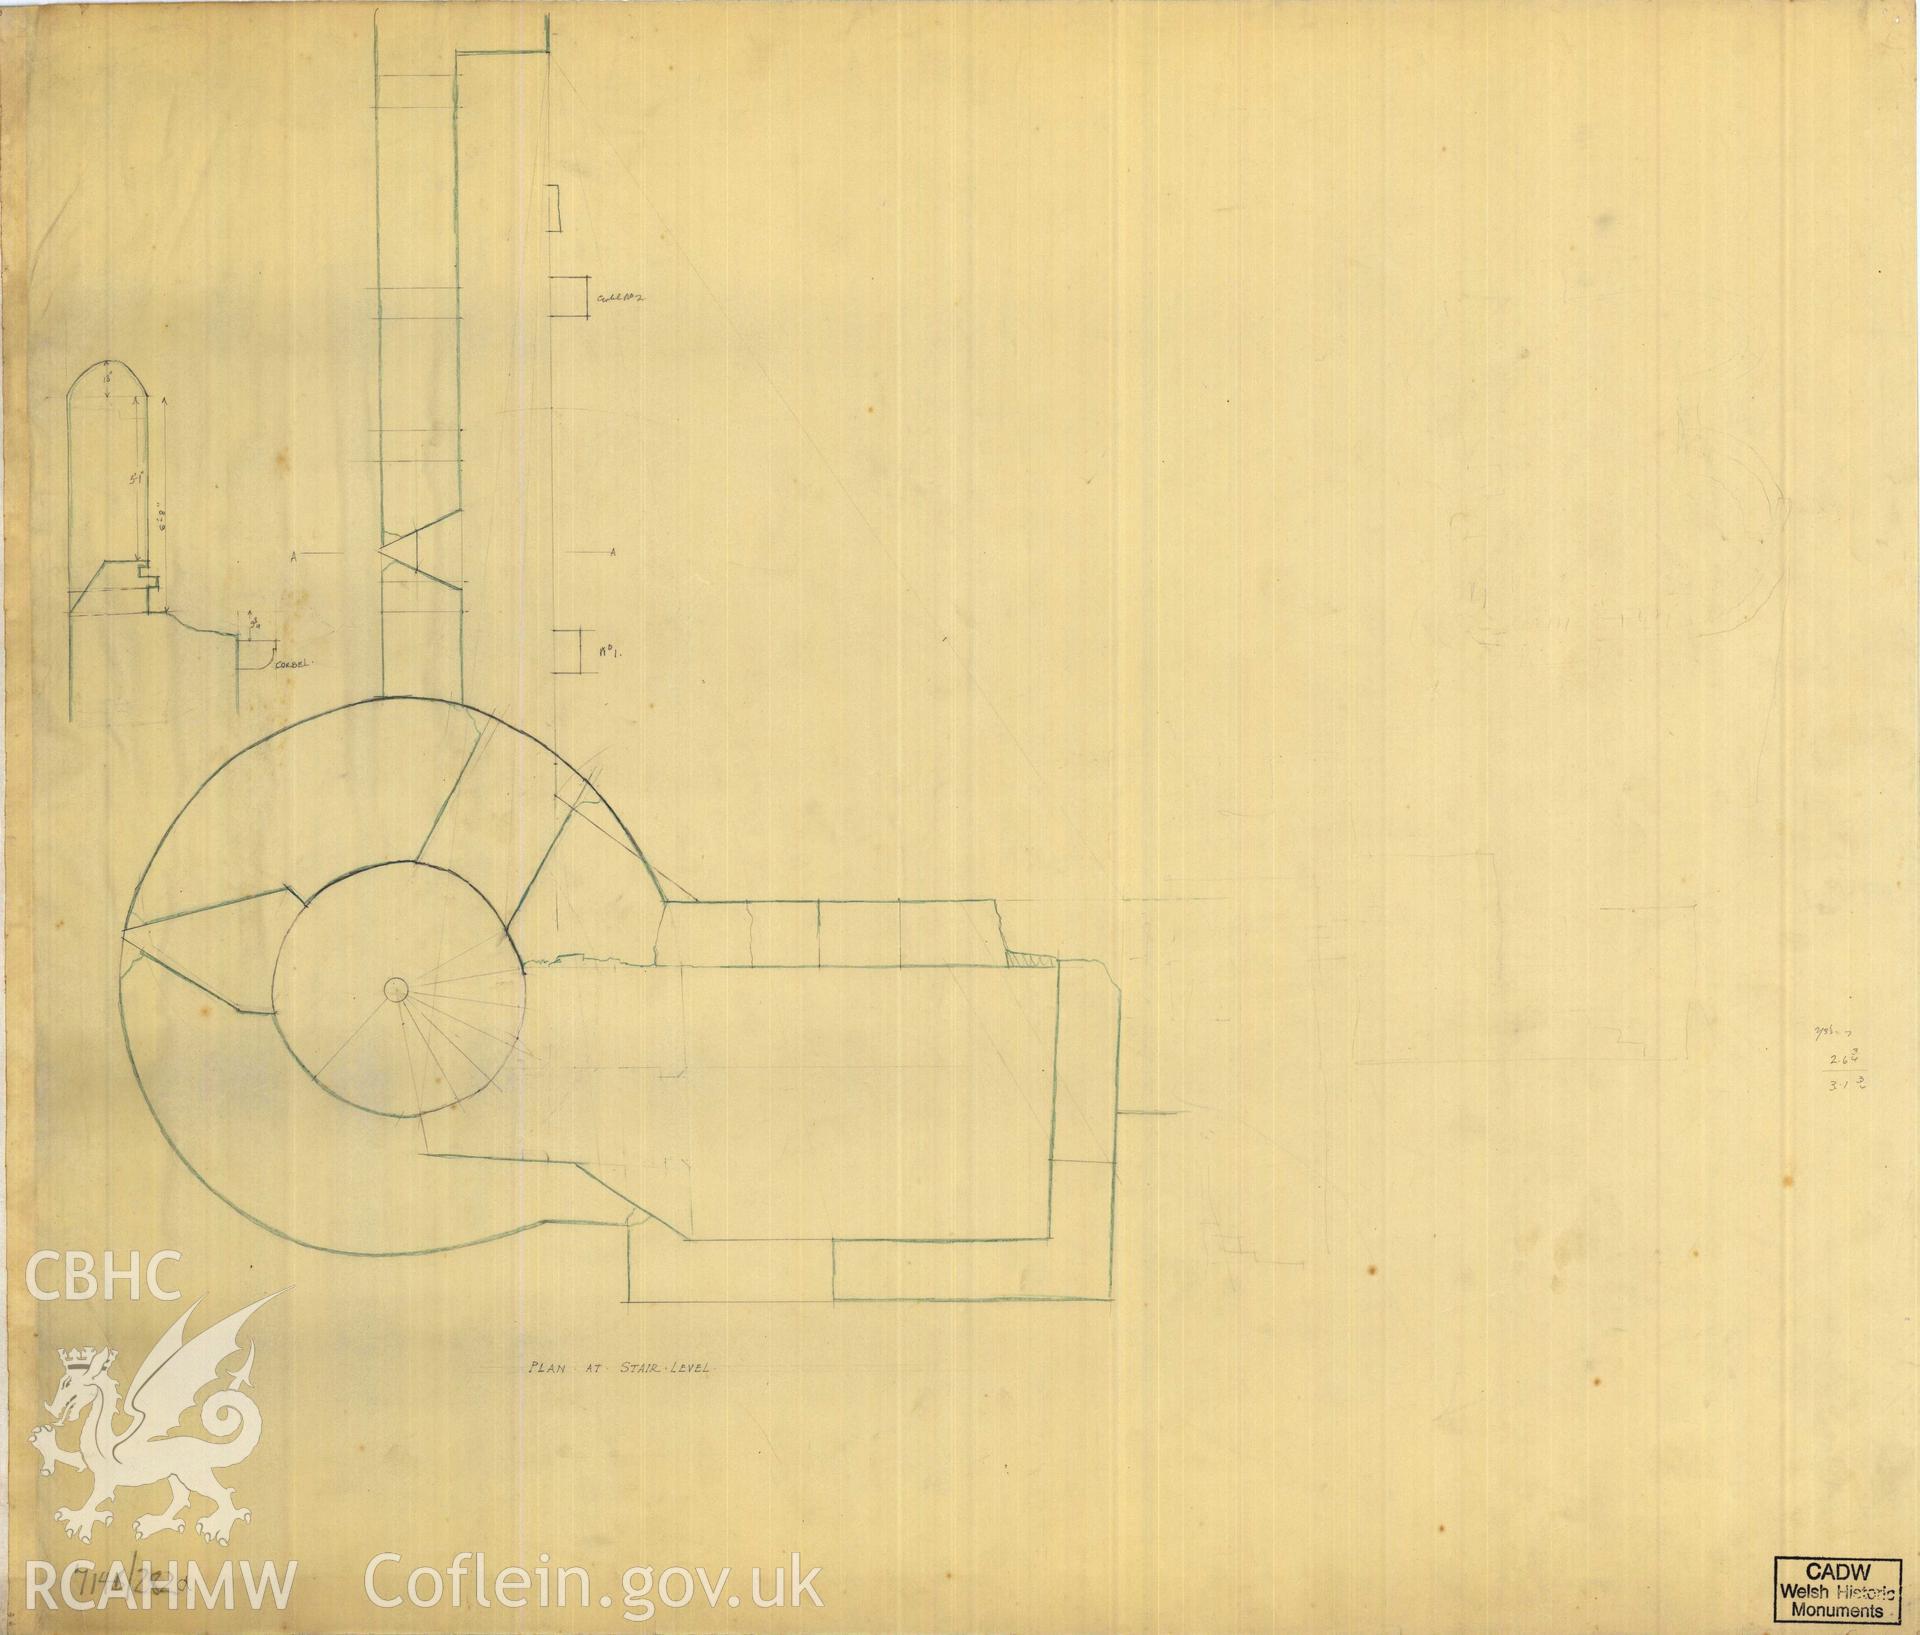 Cadw guardianship monument drawing of Caerphilly Castle. Inner E gate. S turret. Cadw Ref. No:714B/282a. Scale 1:24.